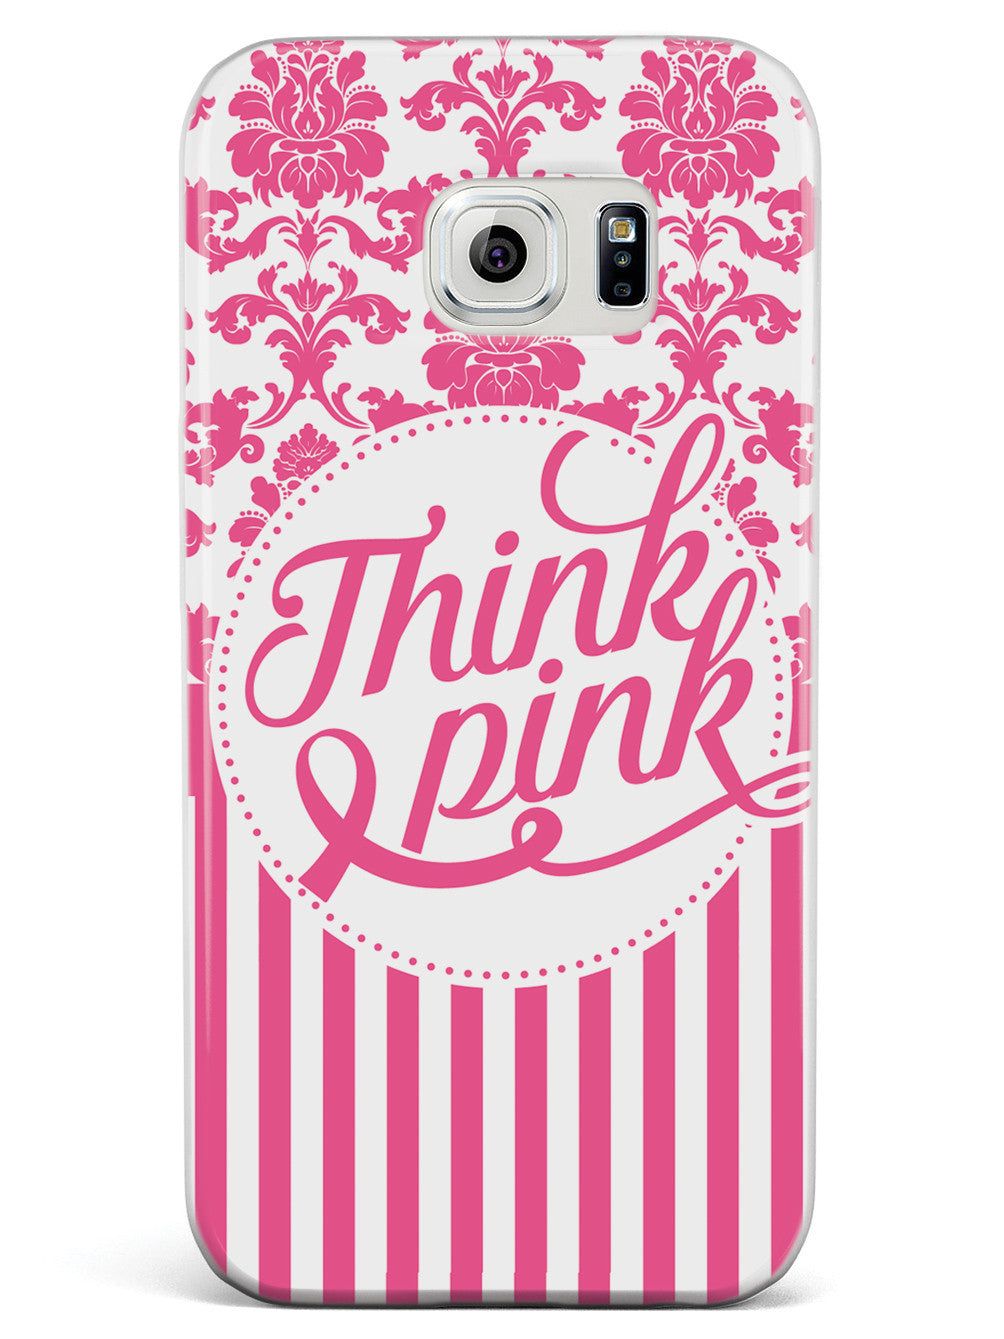 Think Pink - Breast Cancer Awareness Case